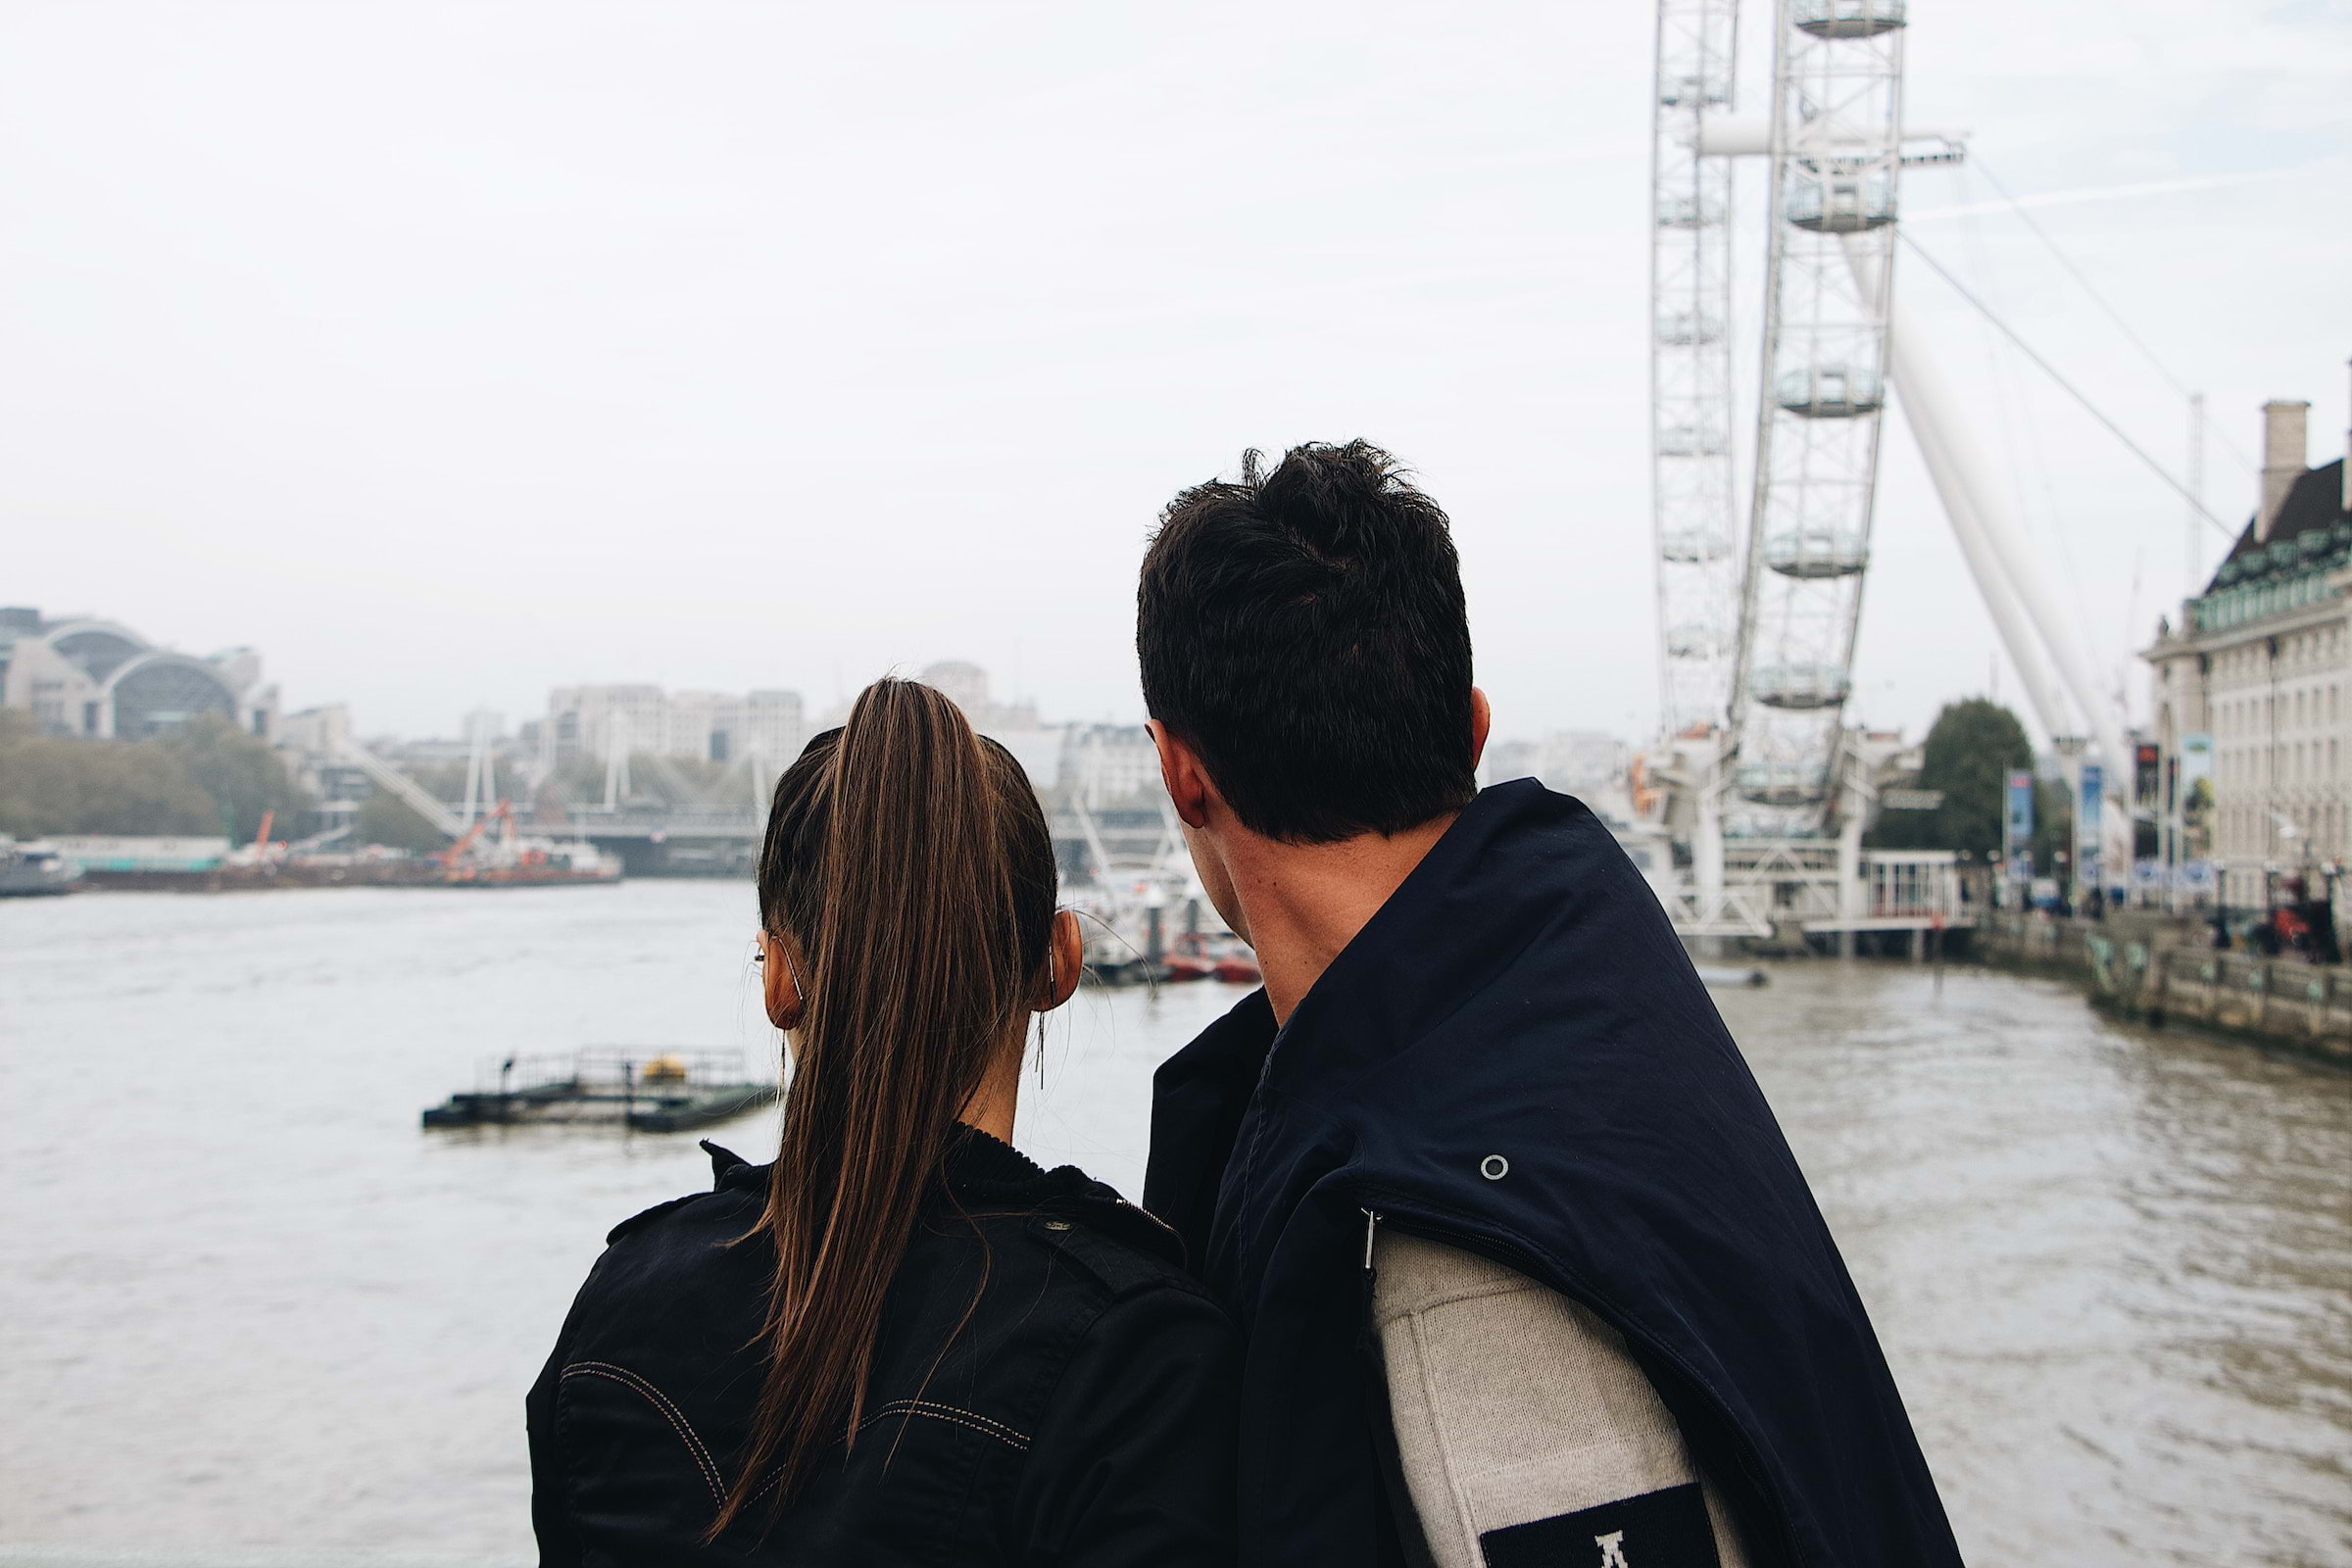 Activities for couples in London